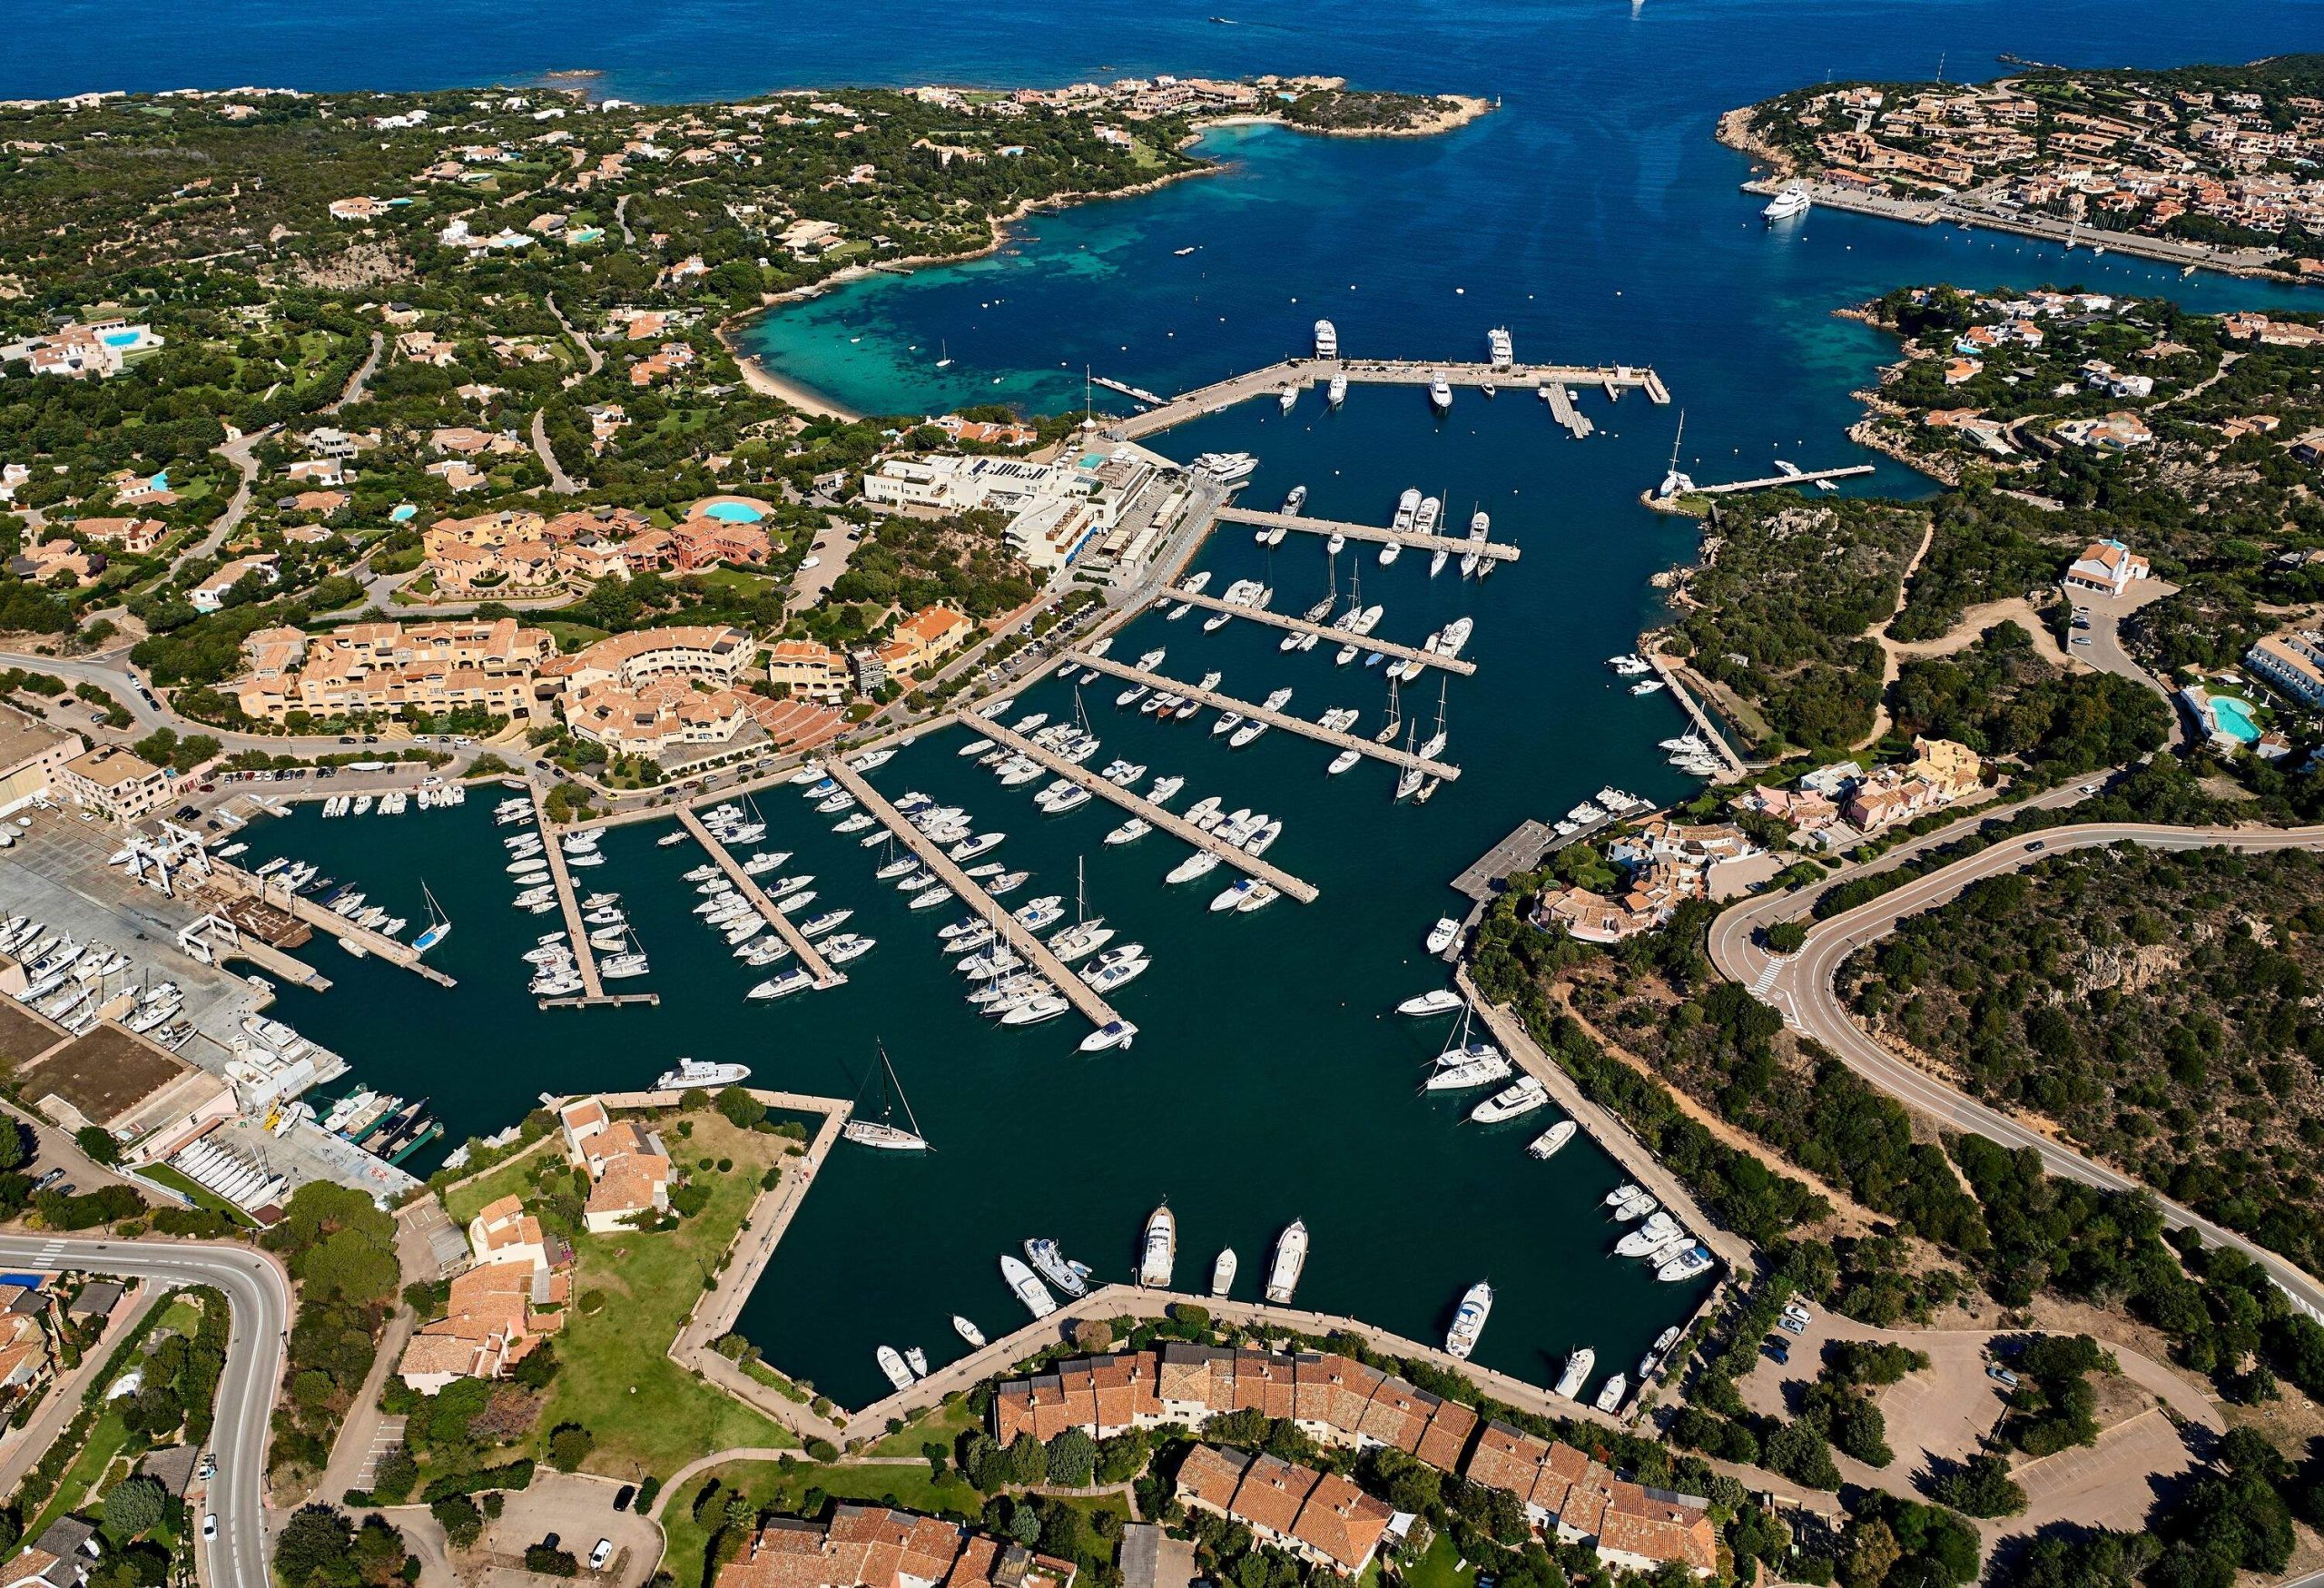 A large port with multiple yacht marinas and coves in a beautiful resort town.